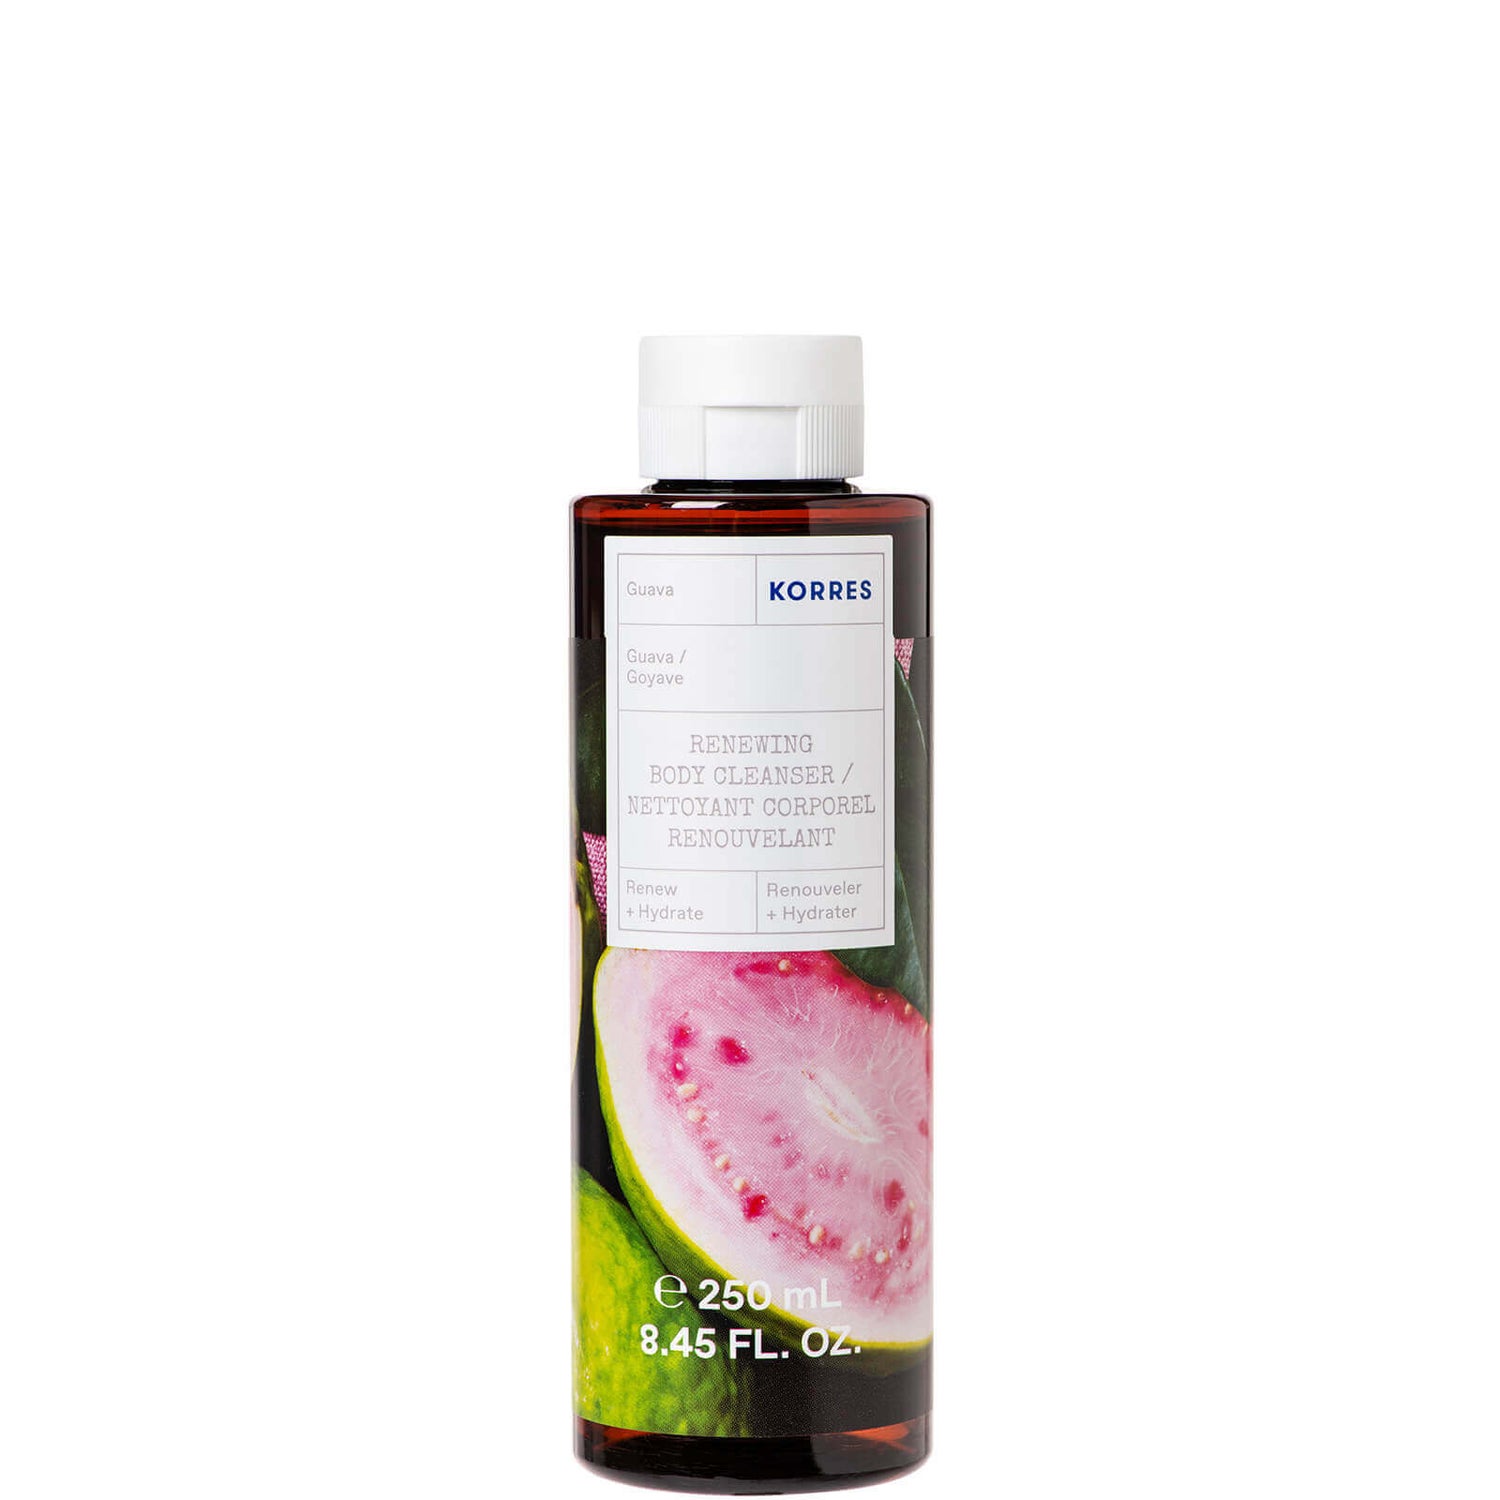 Korres Guava Renewing Body Cleanser 250ml.